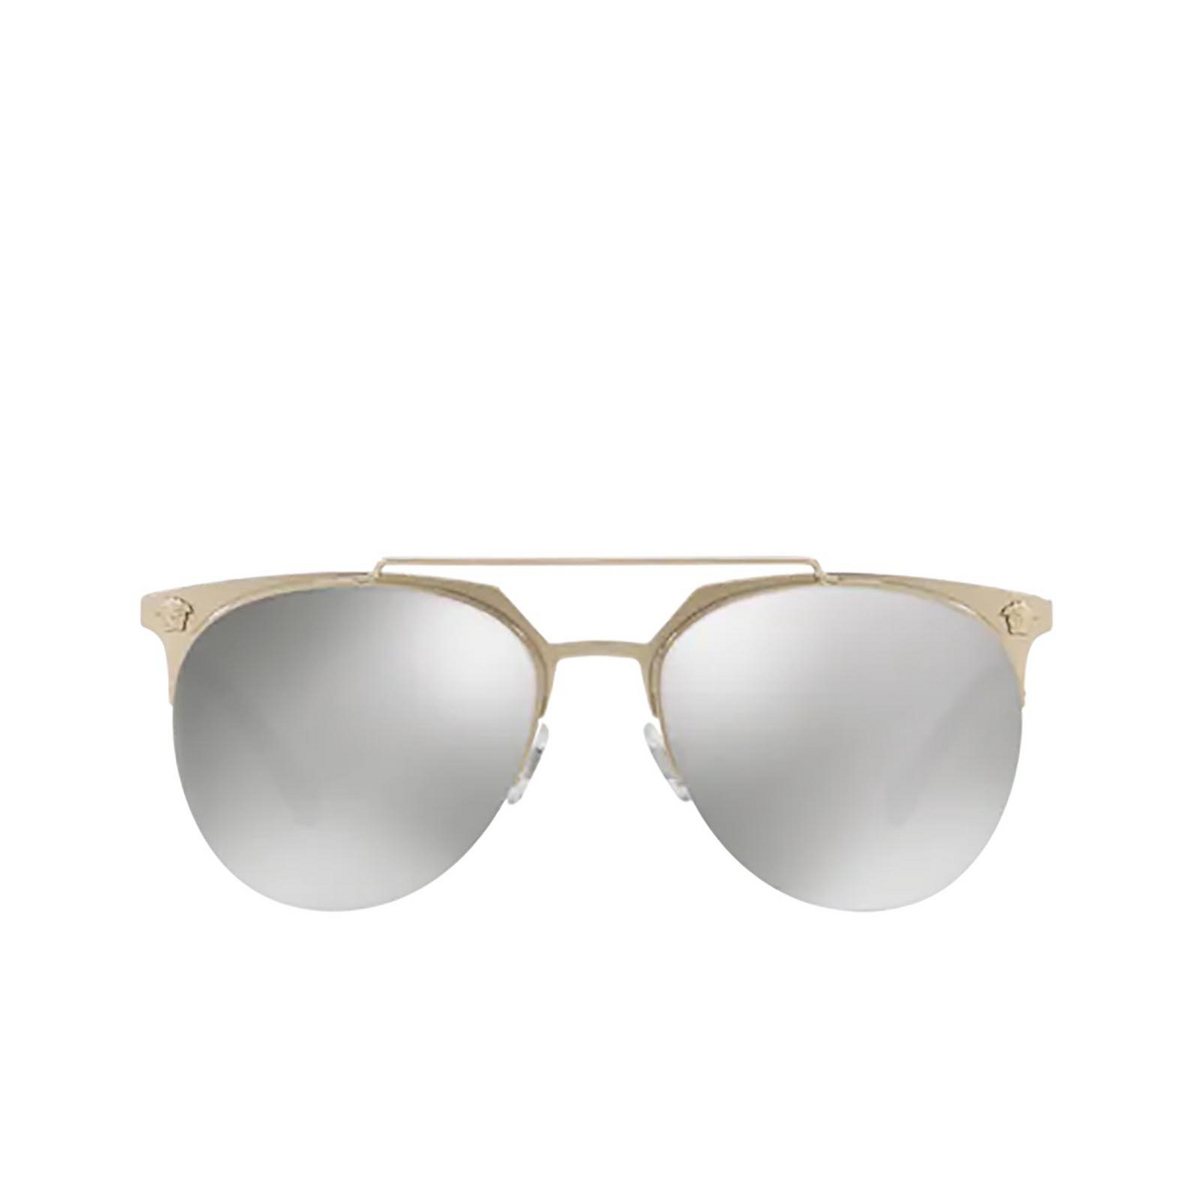 Versace VE2181 Sunglasses 12526G Pale Gold - front view